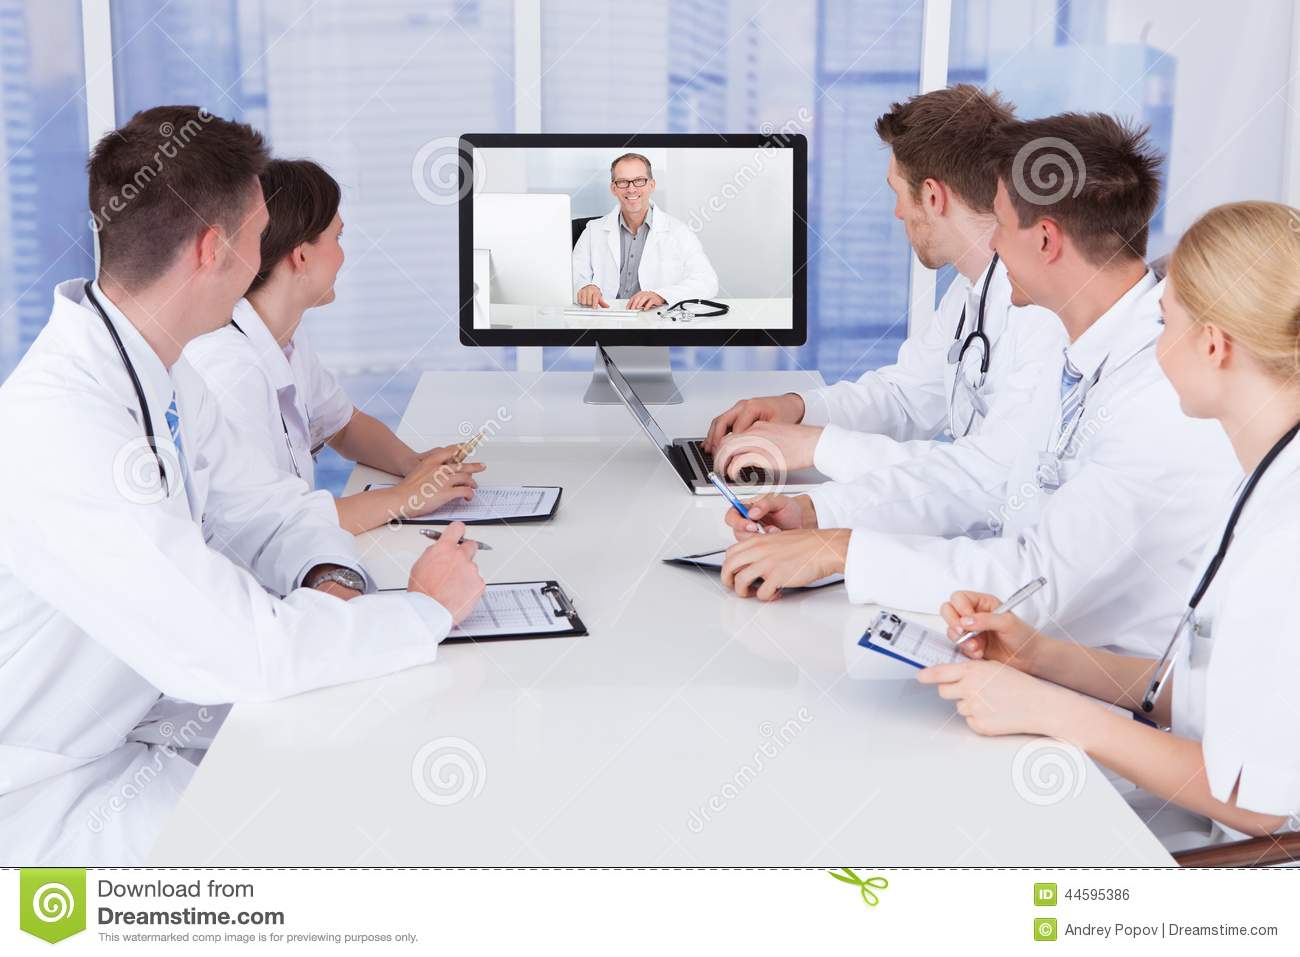     Video Conference Meeting In Hospital Stock Photo   Image  44595386